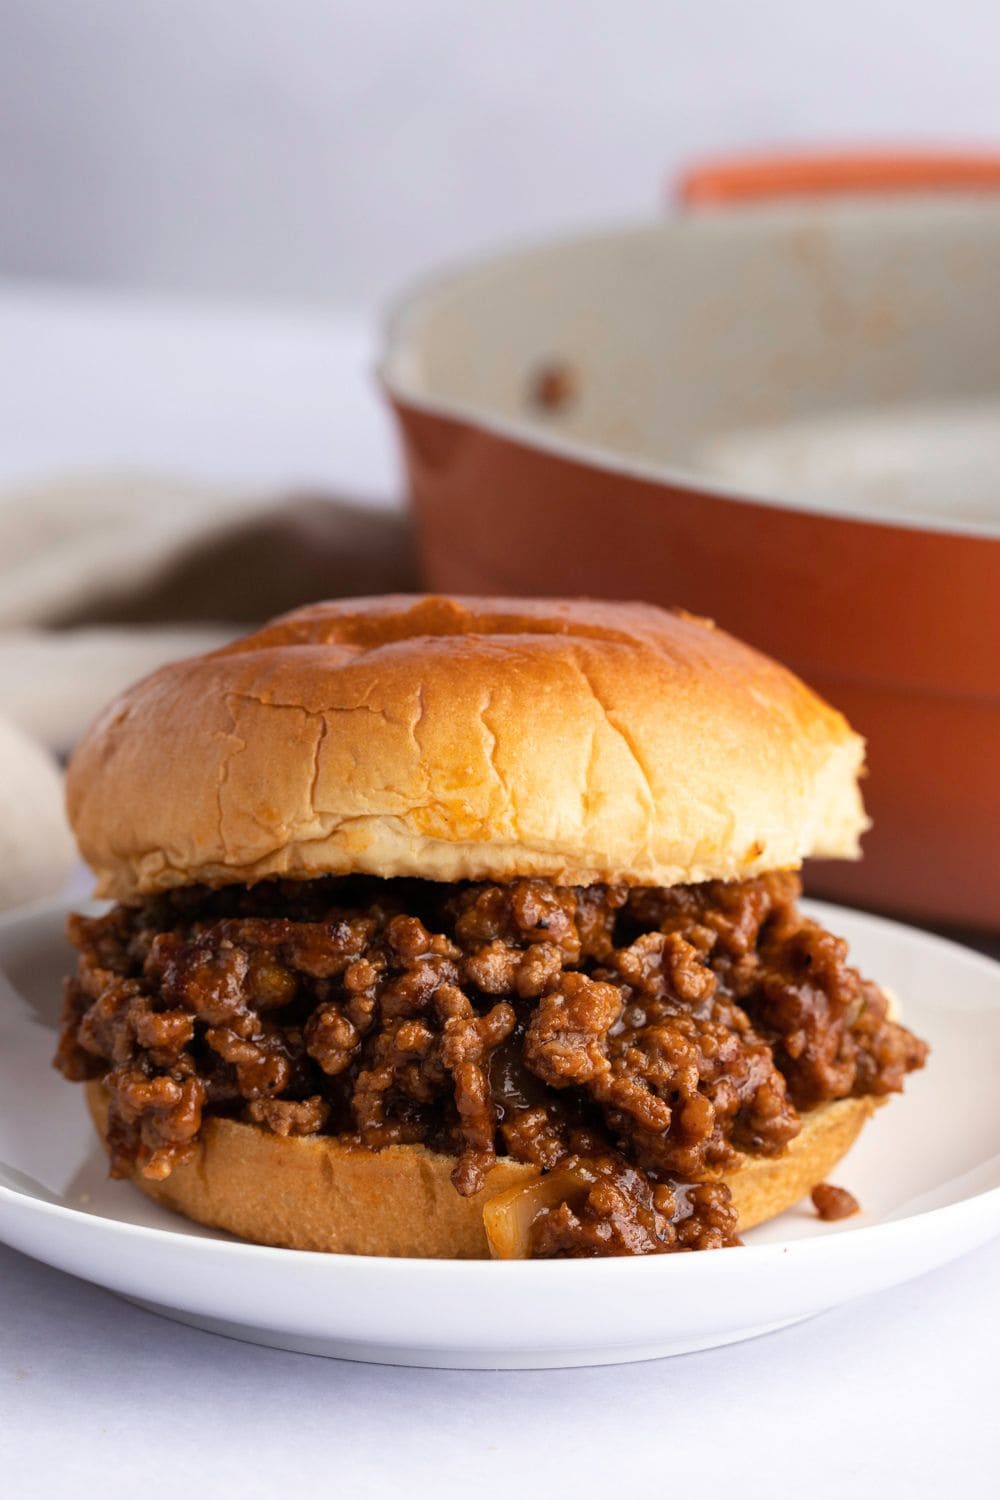 Sloppy Joes made with buns and ground beef filling served on a white plate. 